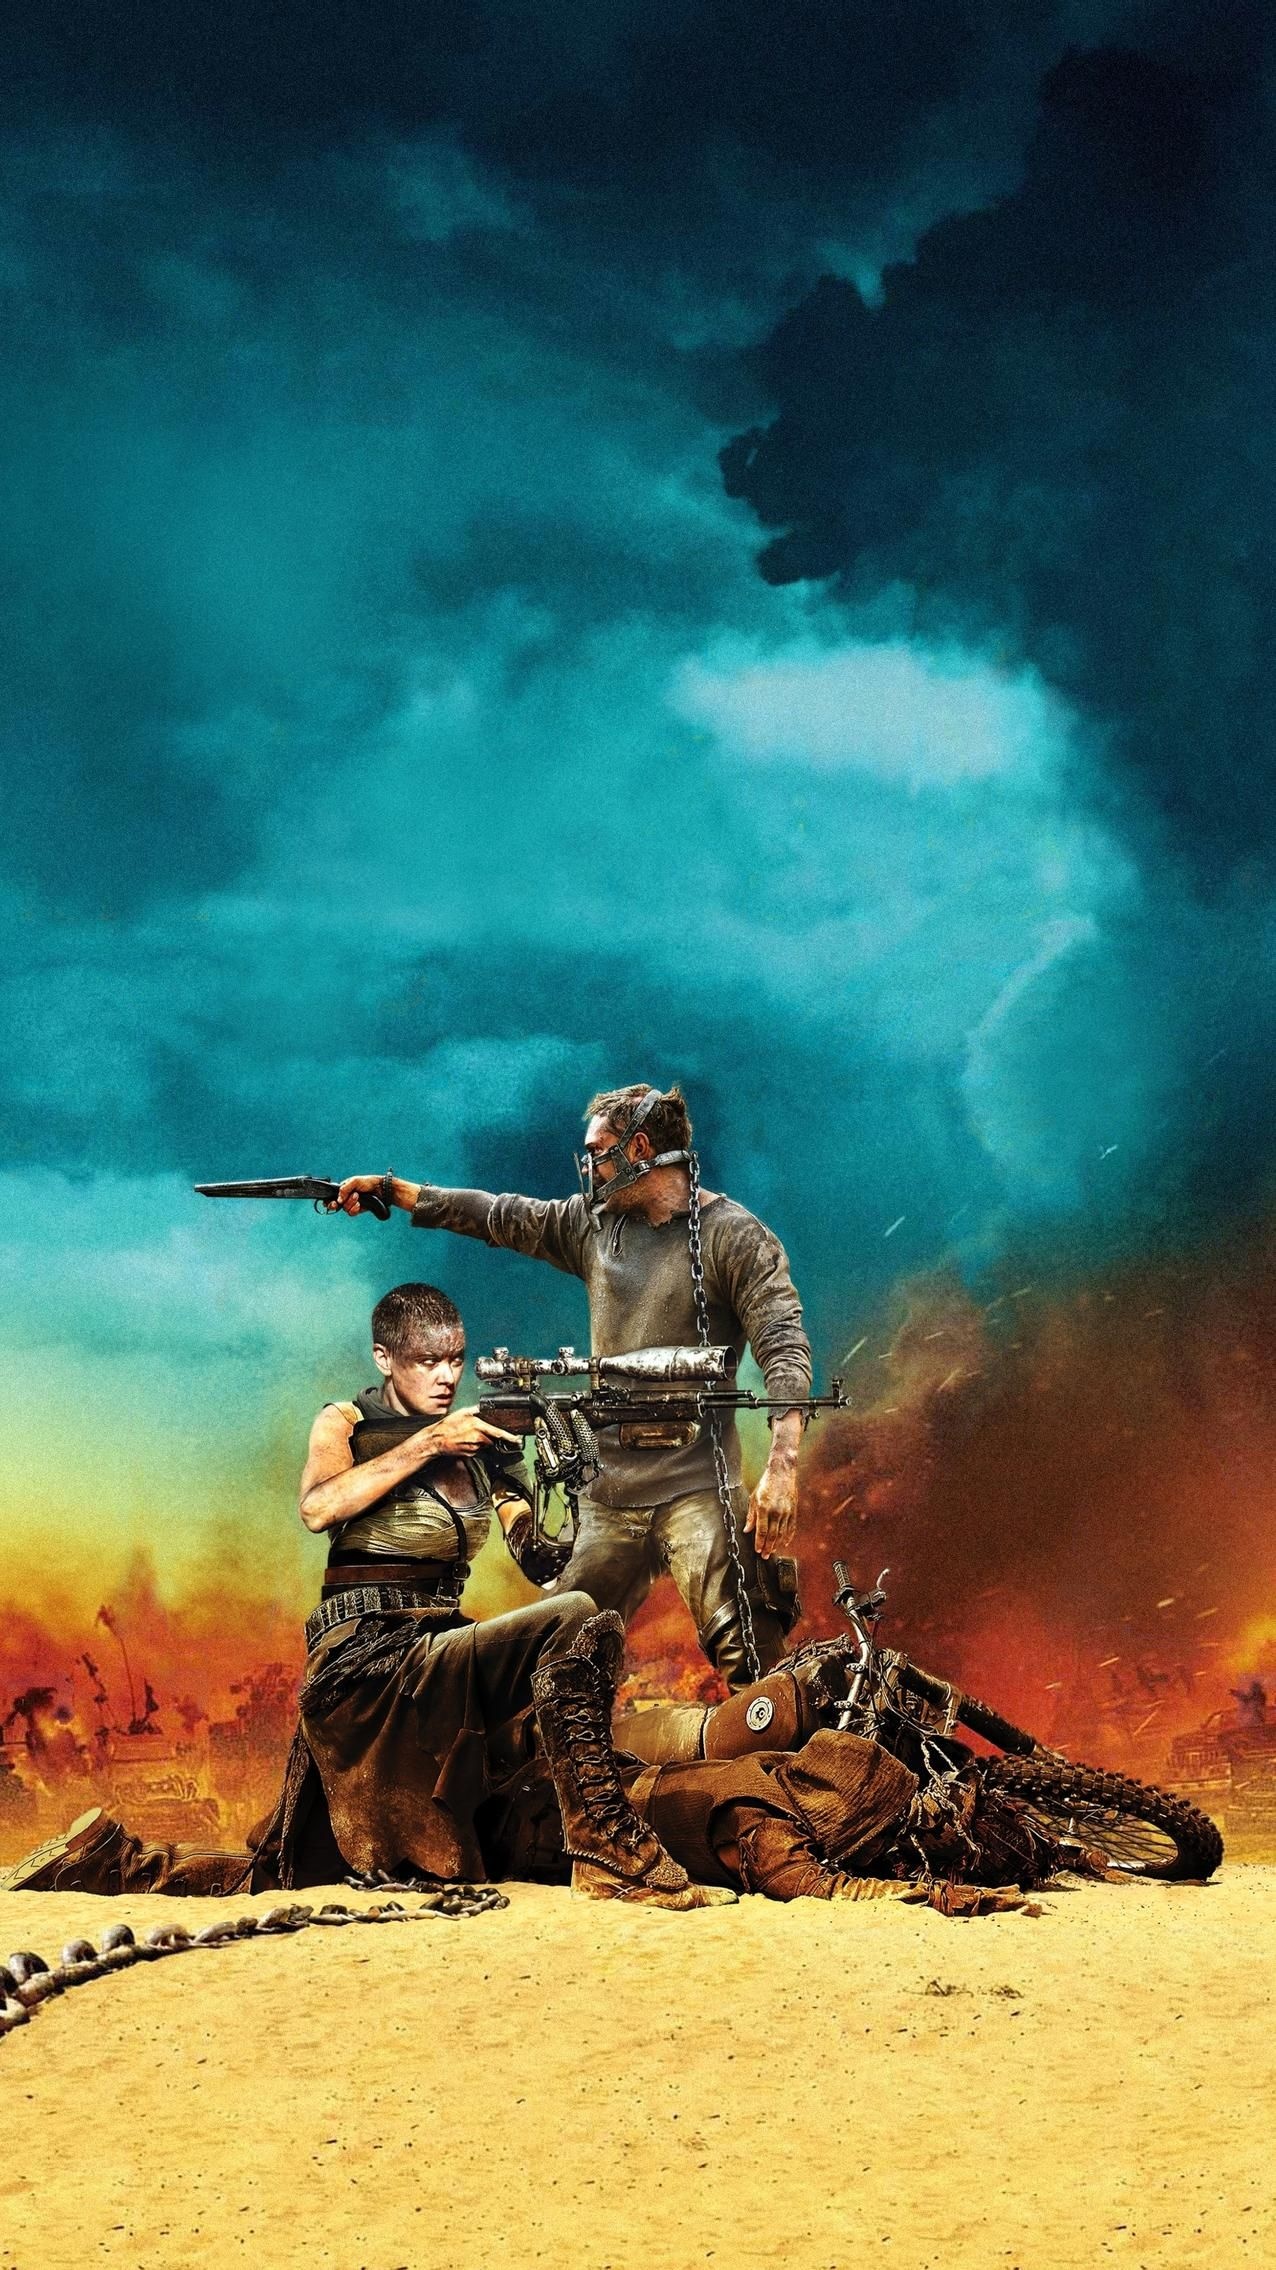 Mad Max: Fury Road: Tom Hardy, Charlize Theron, Action. 1280x2270 HD Wallpaper.